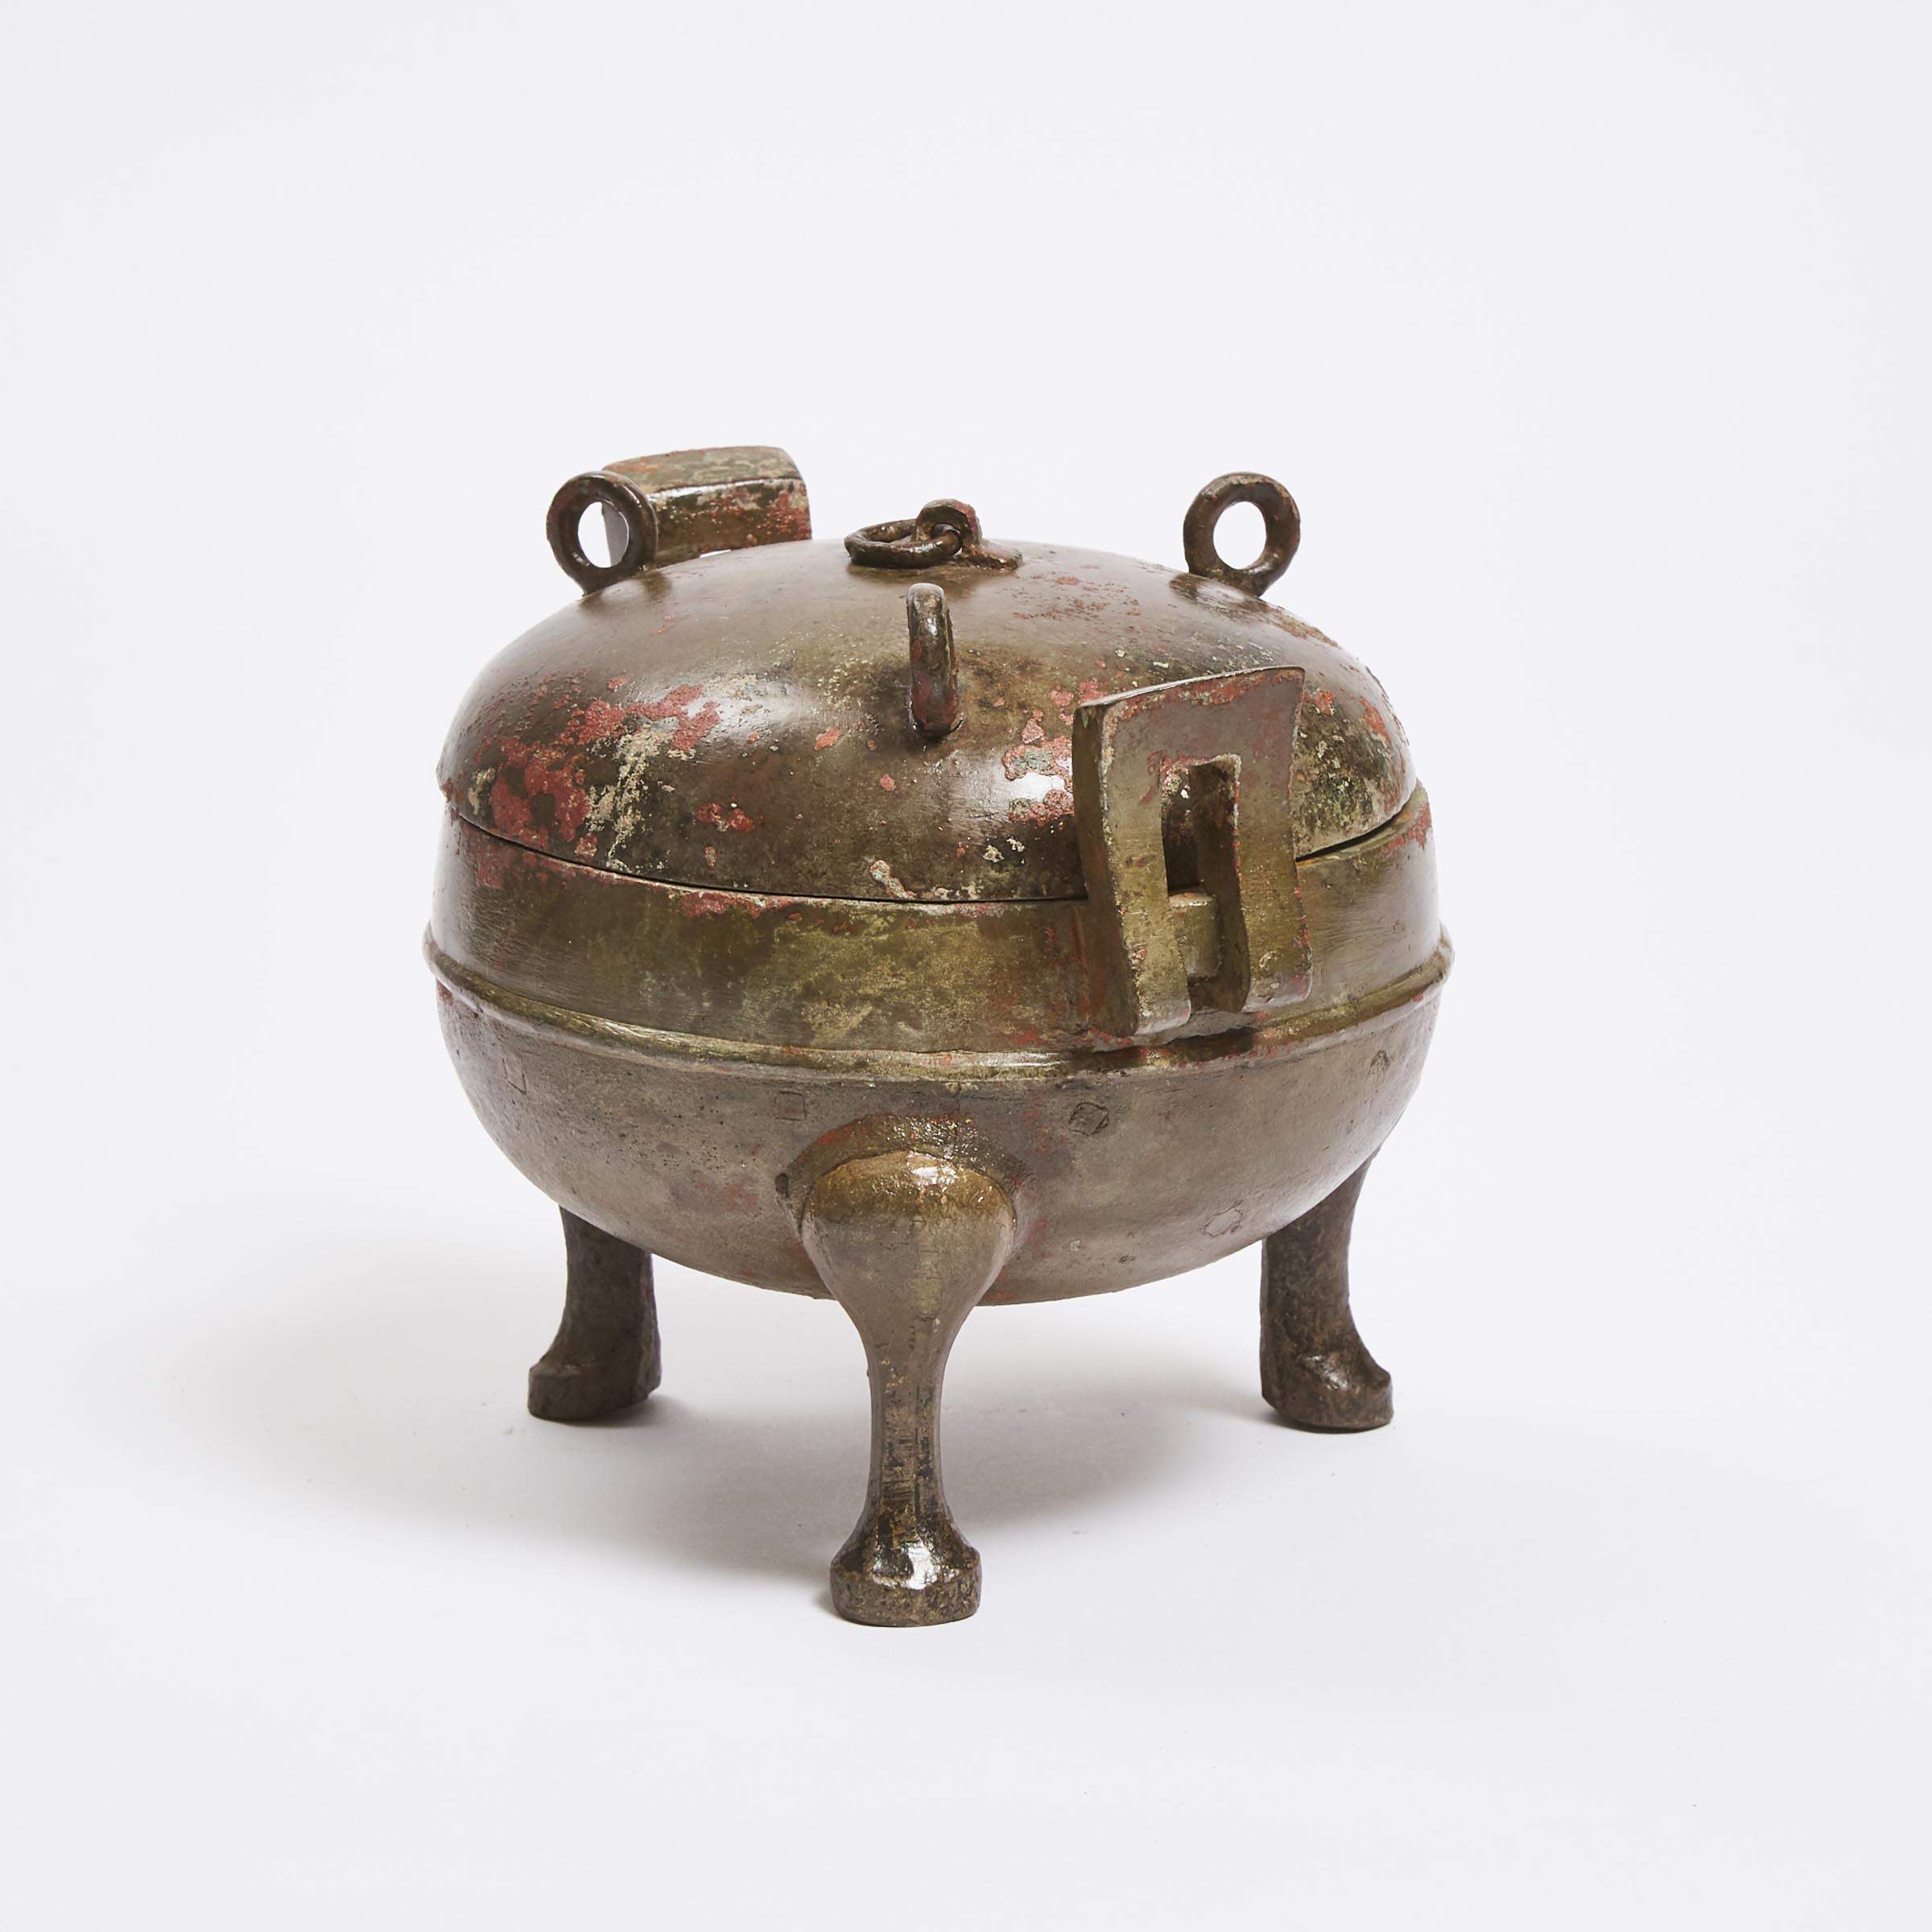 A Bronze Ritual Tripod Vessel and Cover, Ding, Warring States Period (475-221 BC)